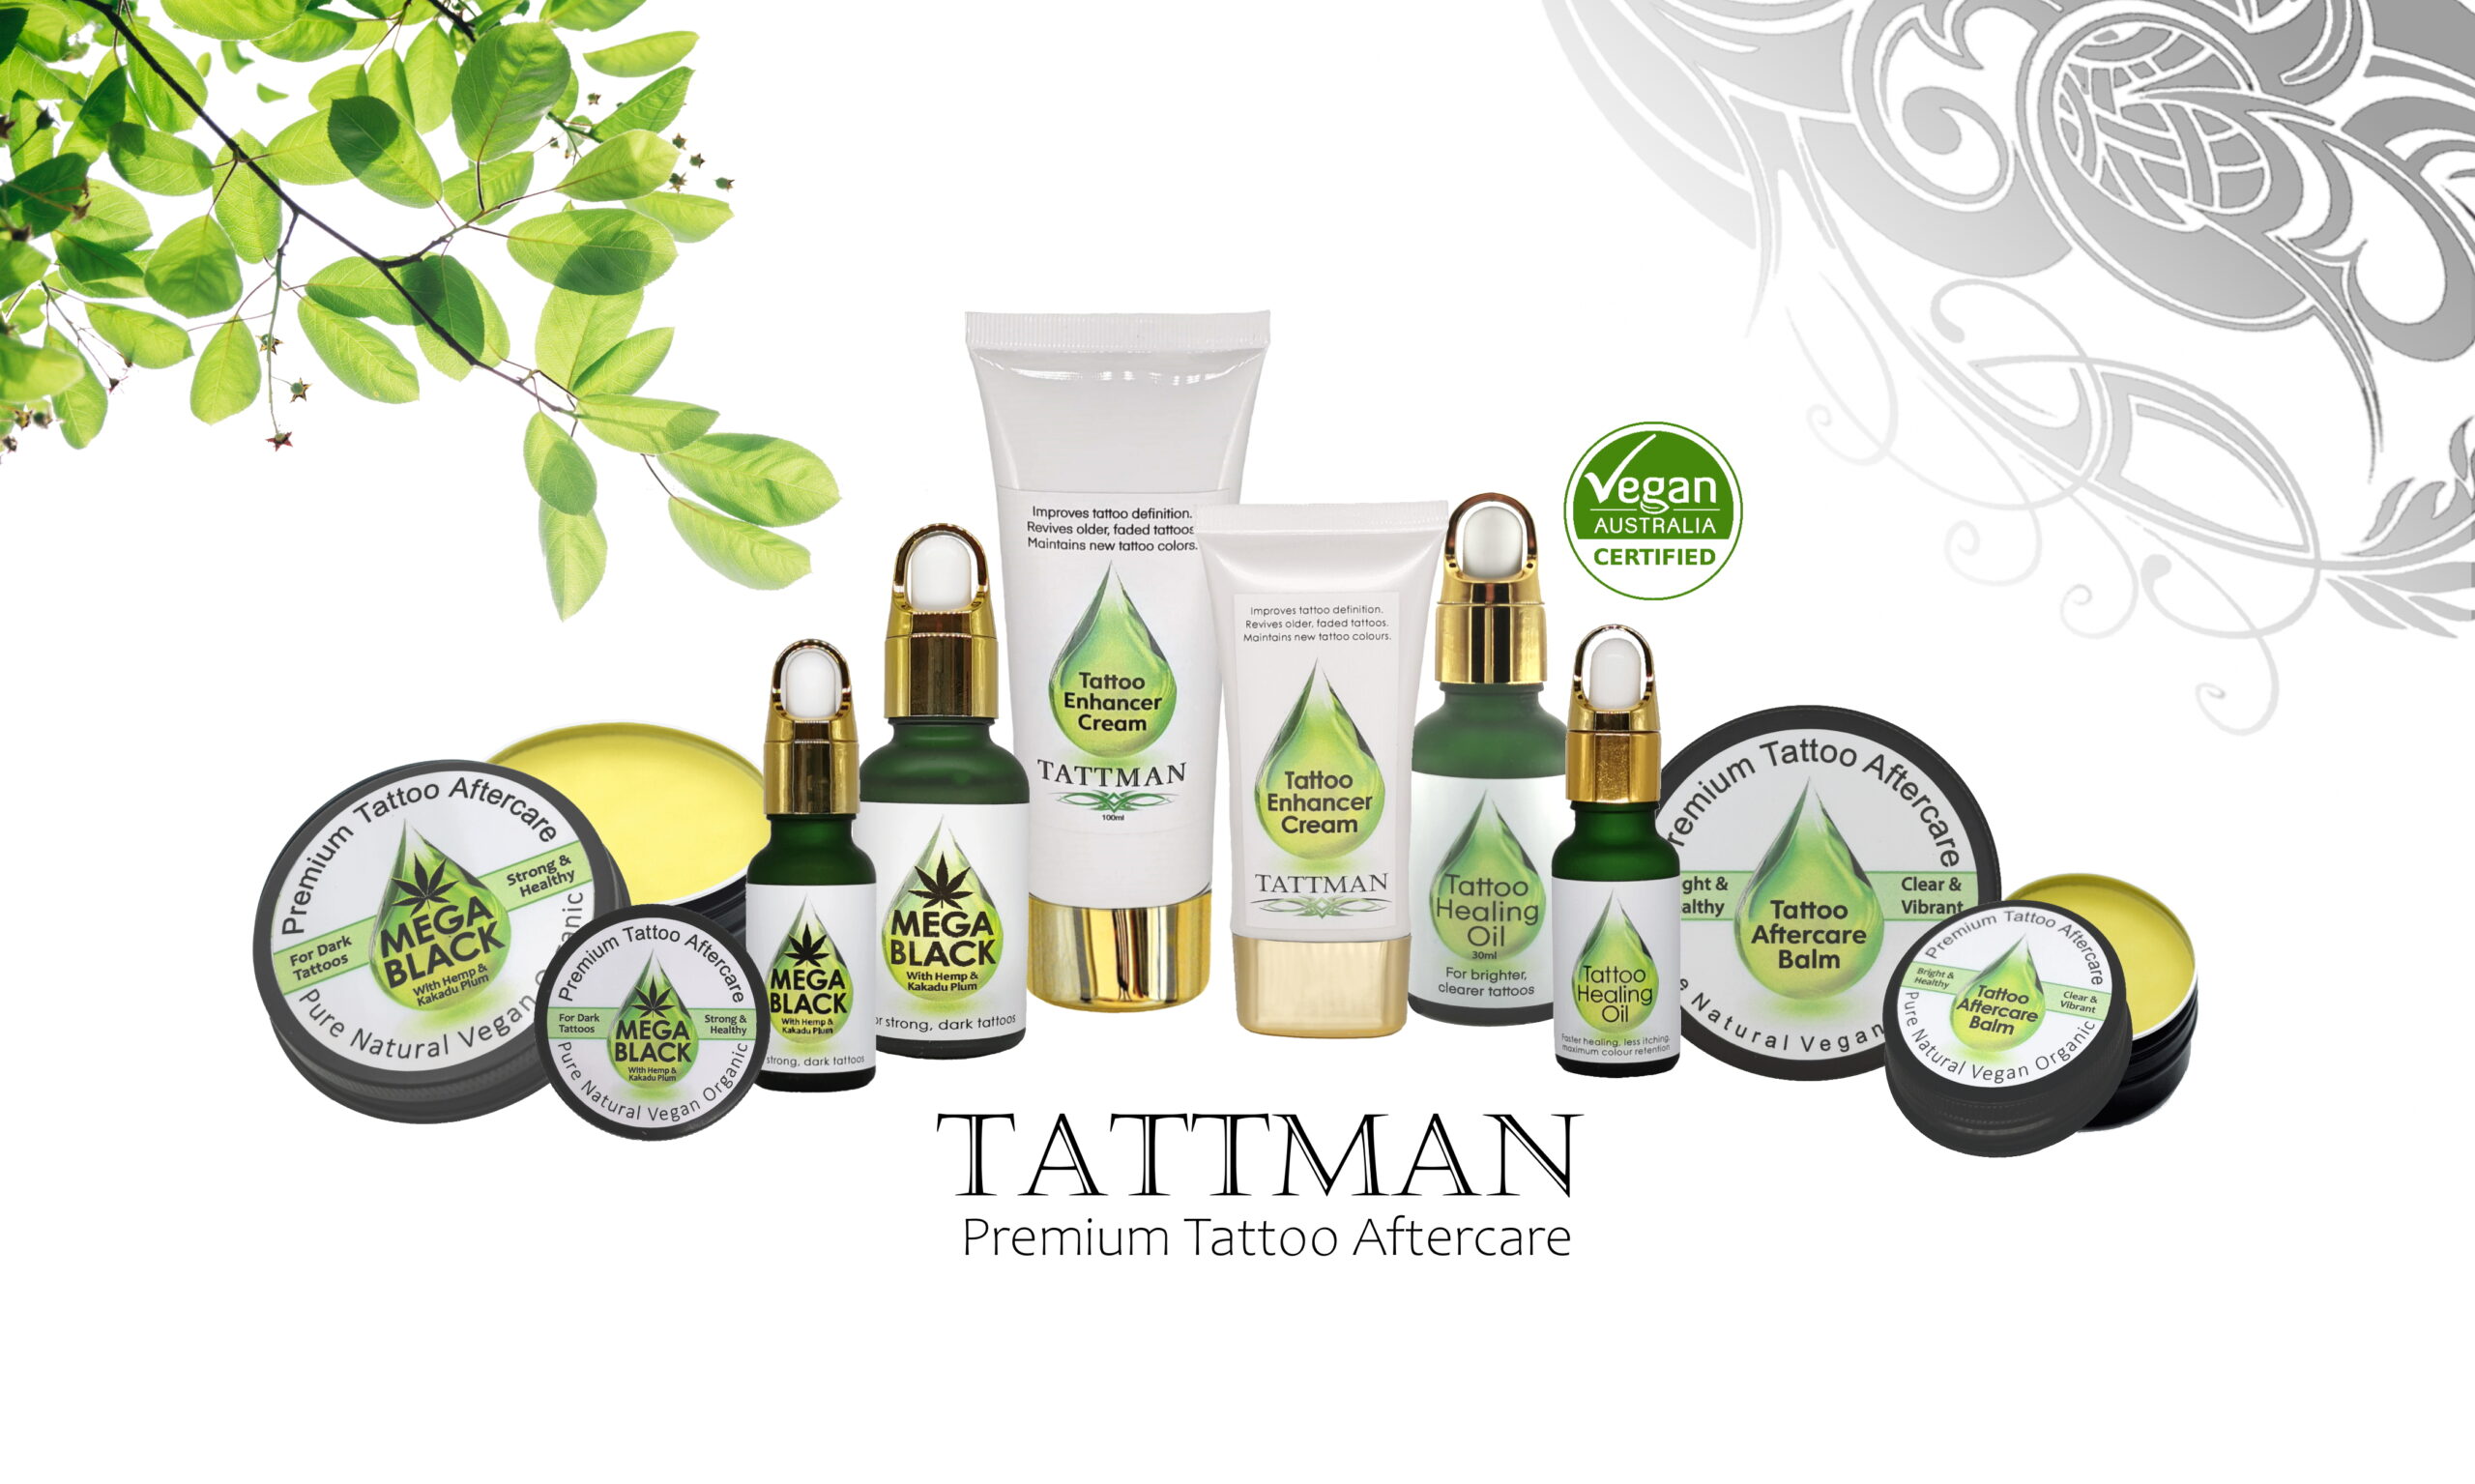 High quality Tattman tattoo after care products guarantee  the best long term care.